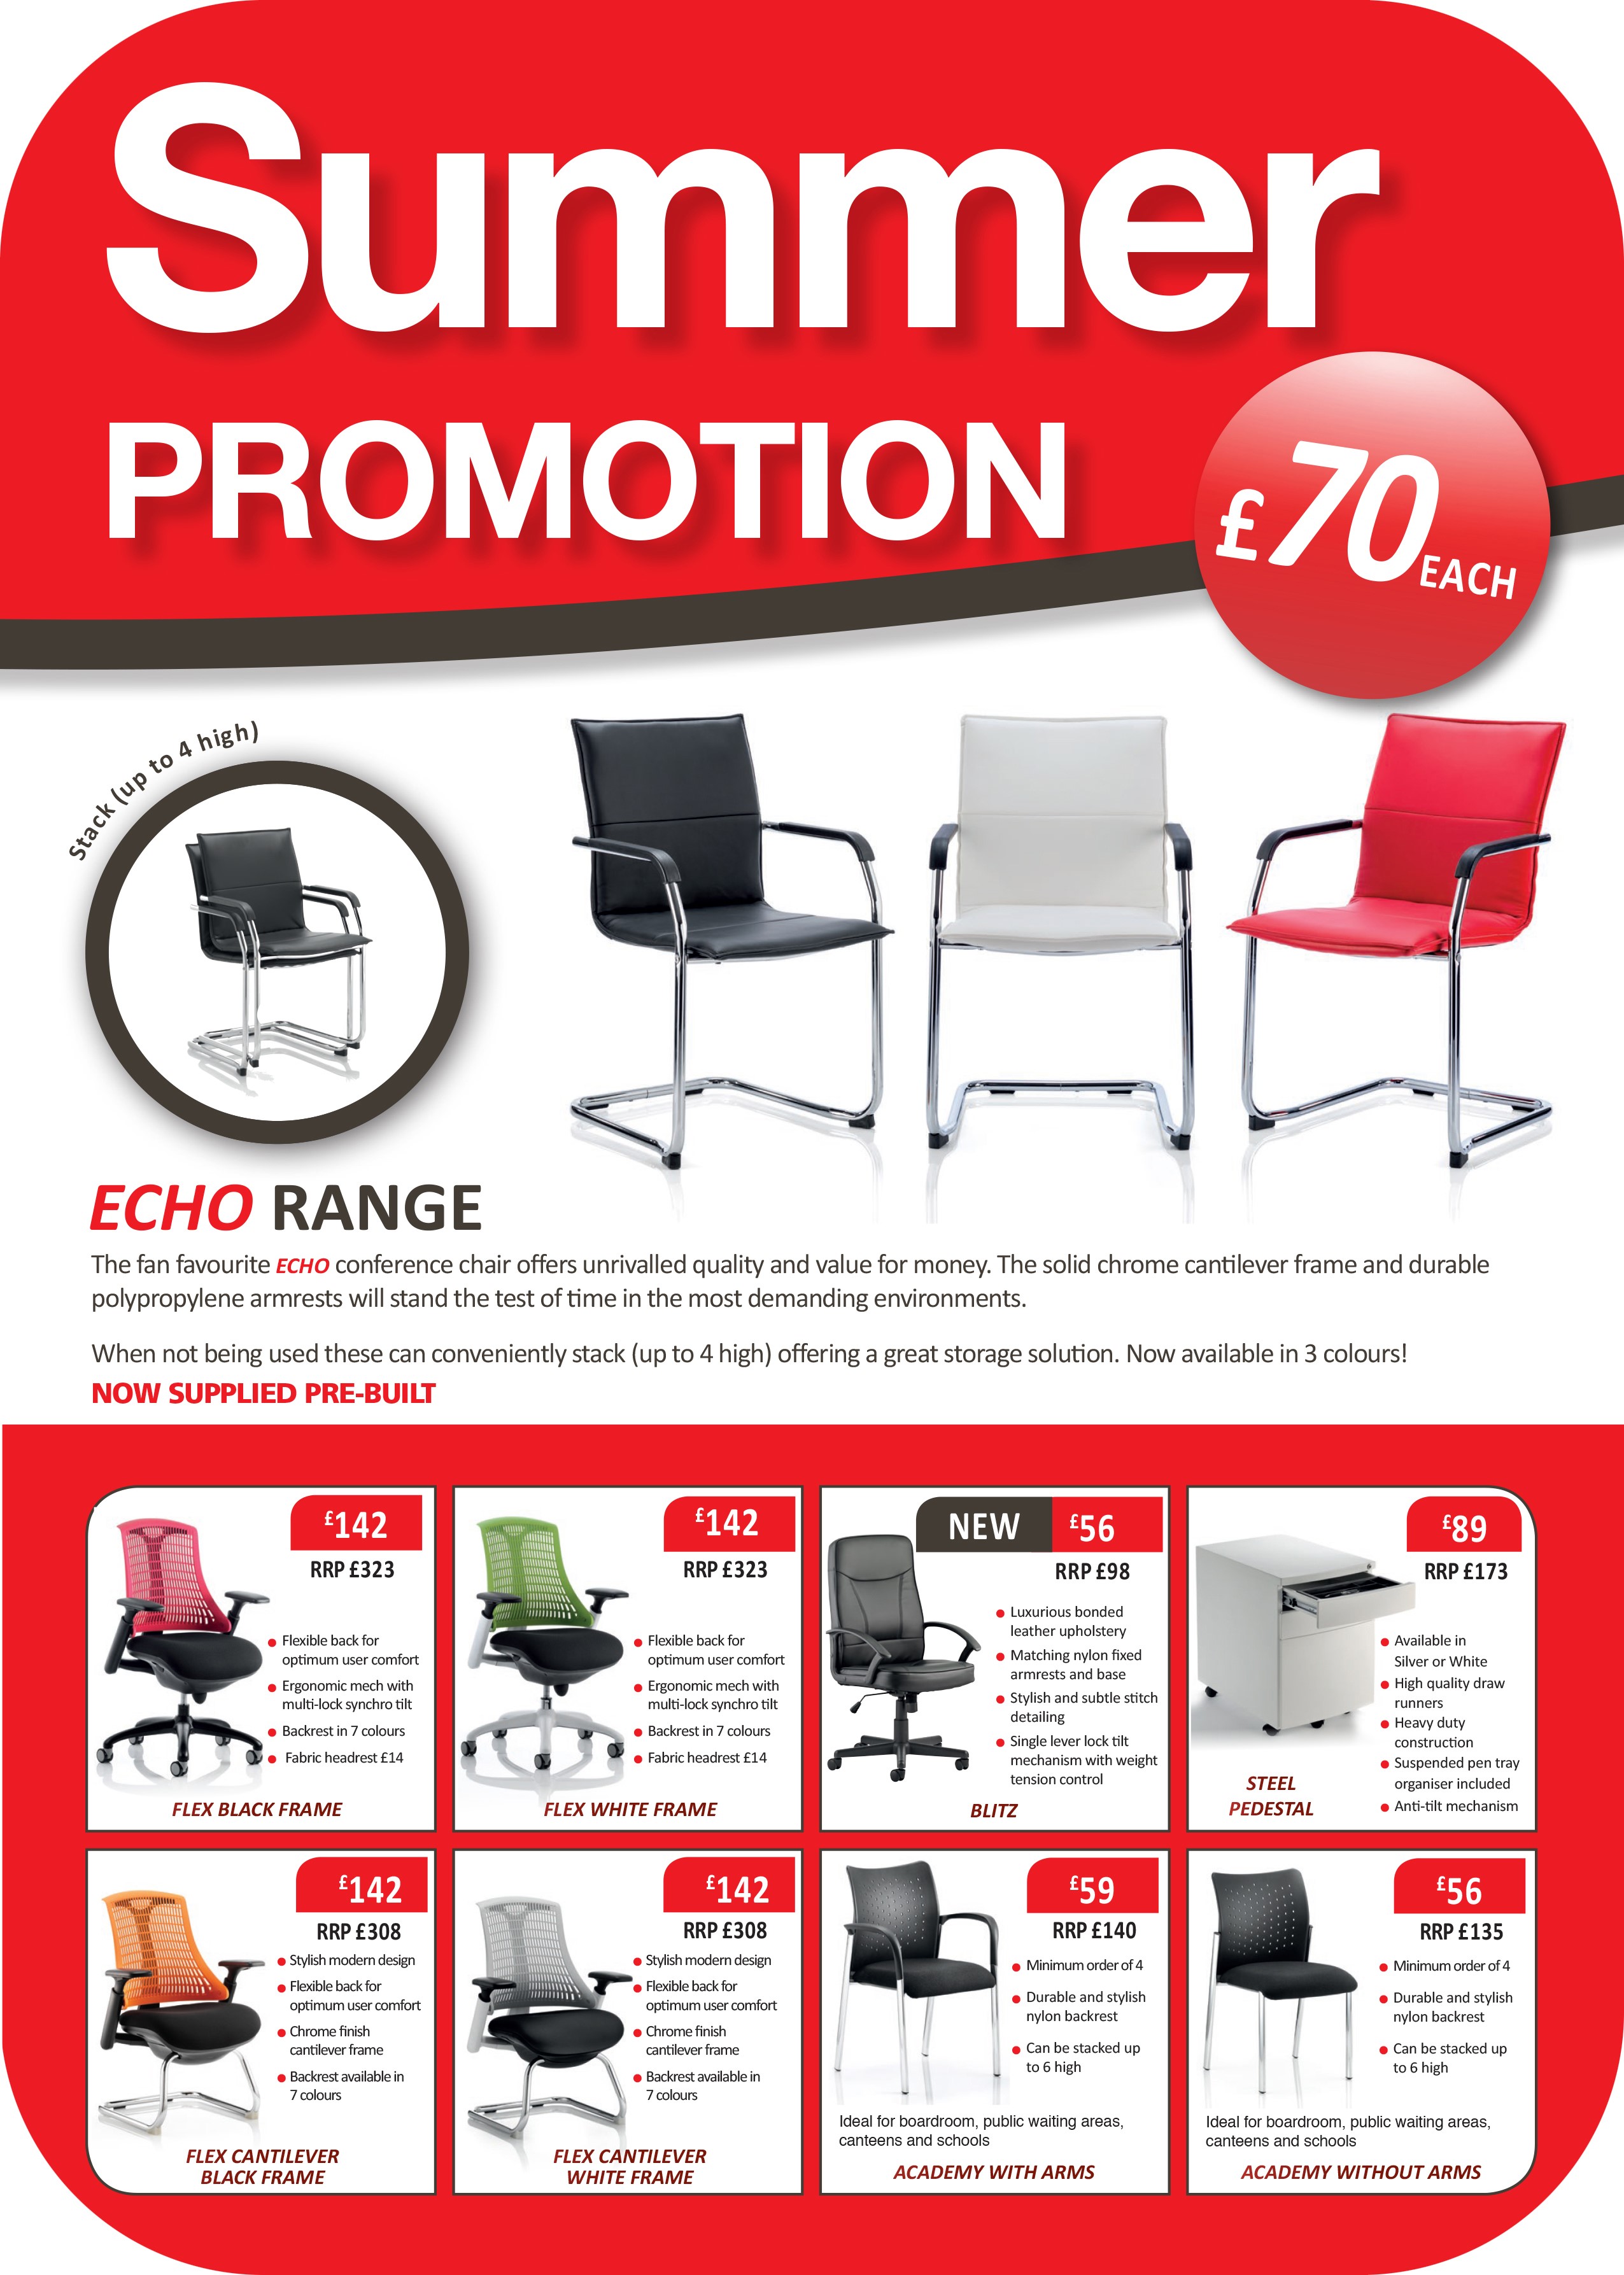 Summer Promotion for Office Chairs and Storage